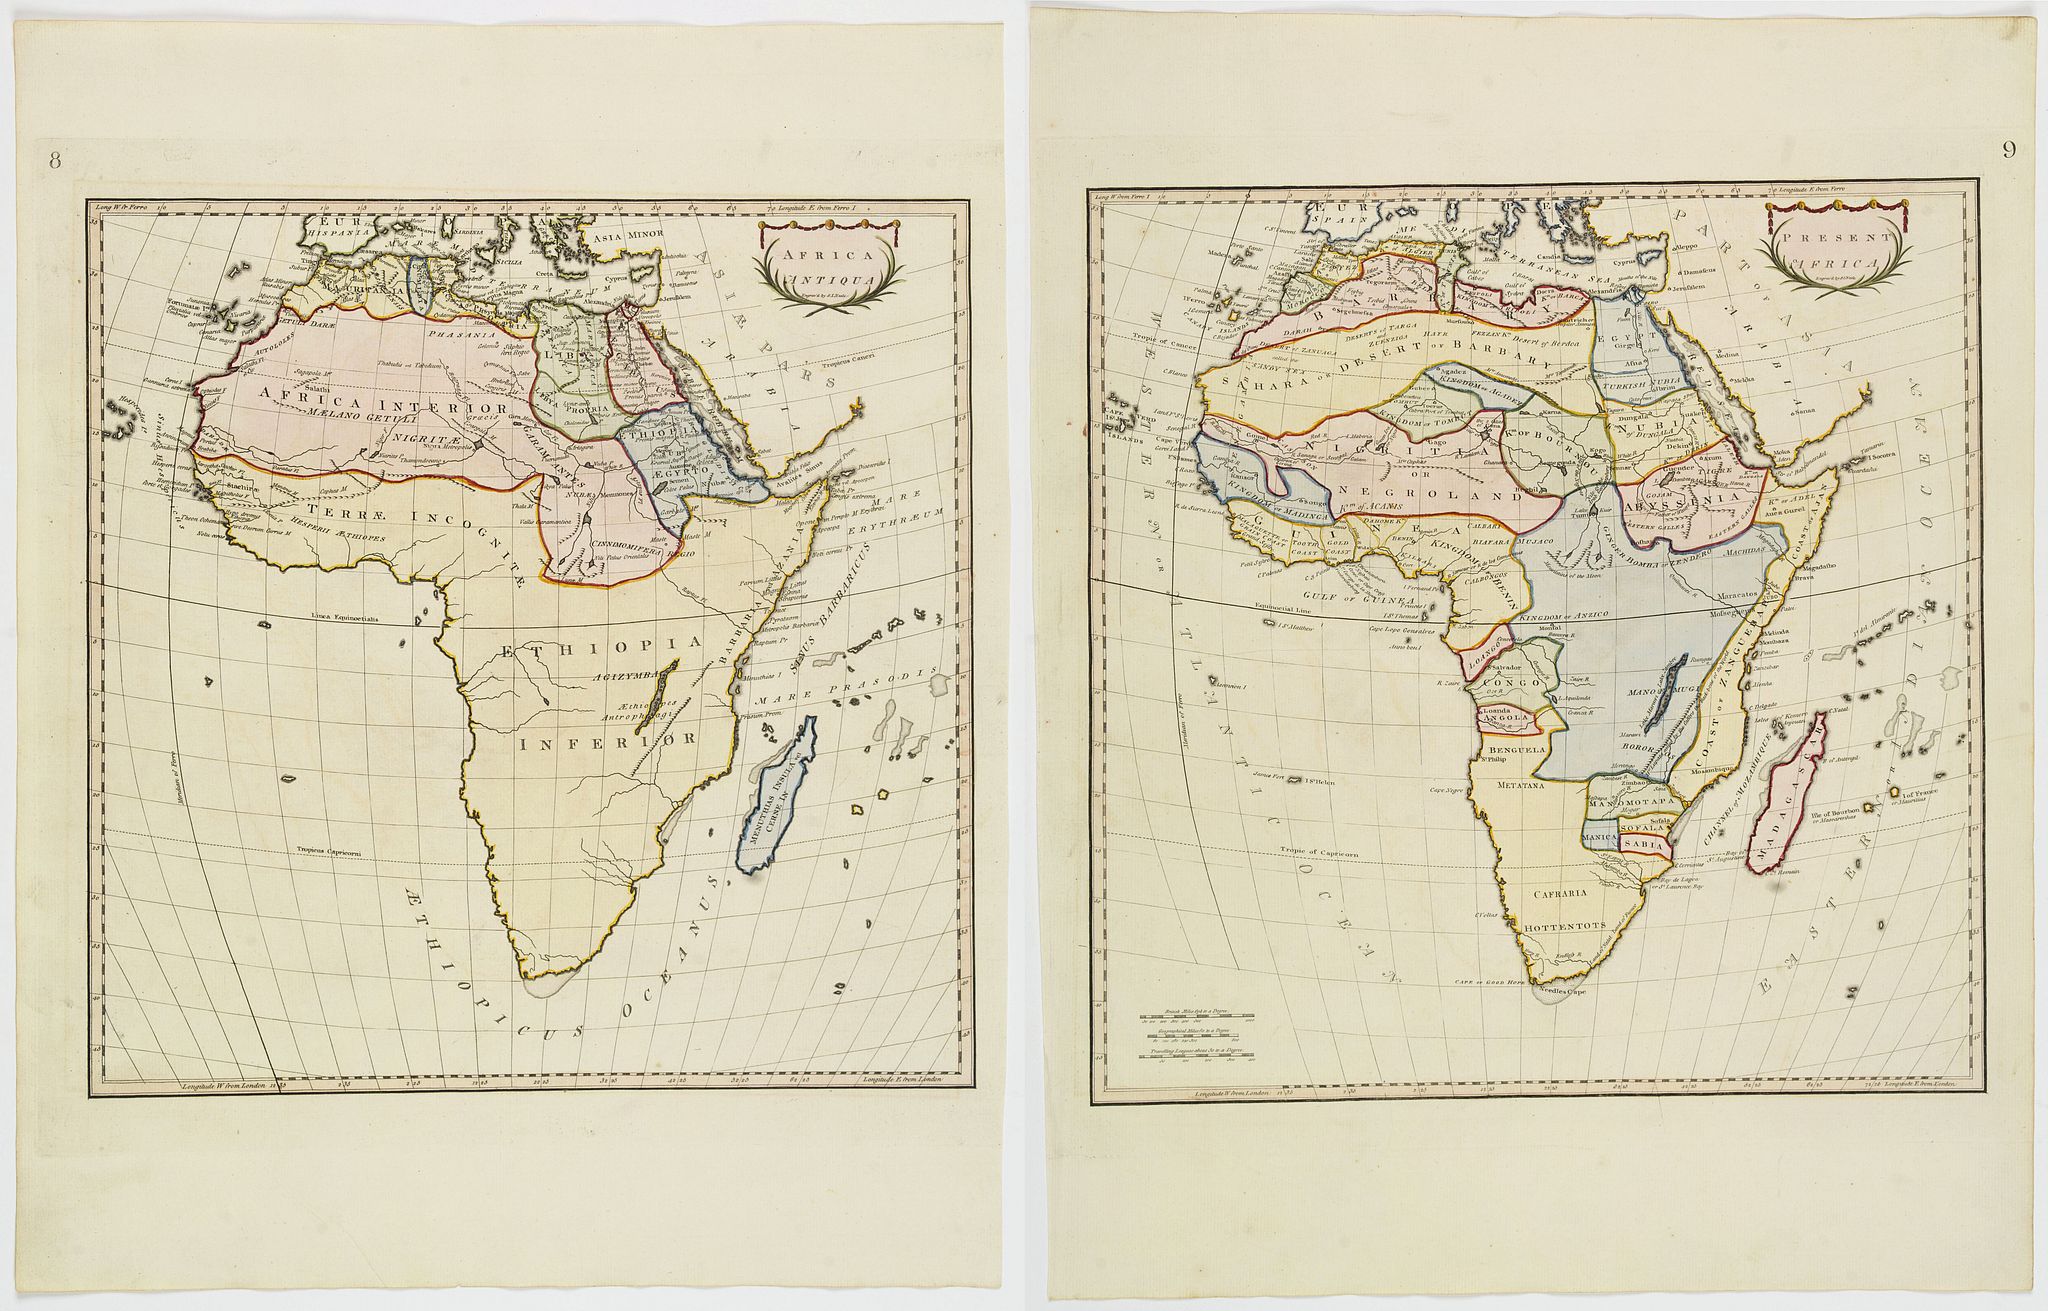 Africa Antiqua [together with] Present Africa.